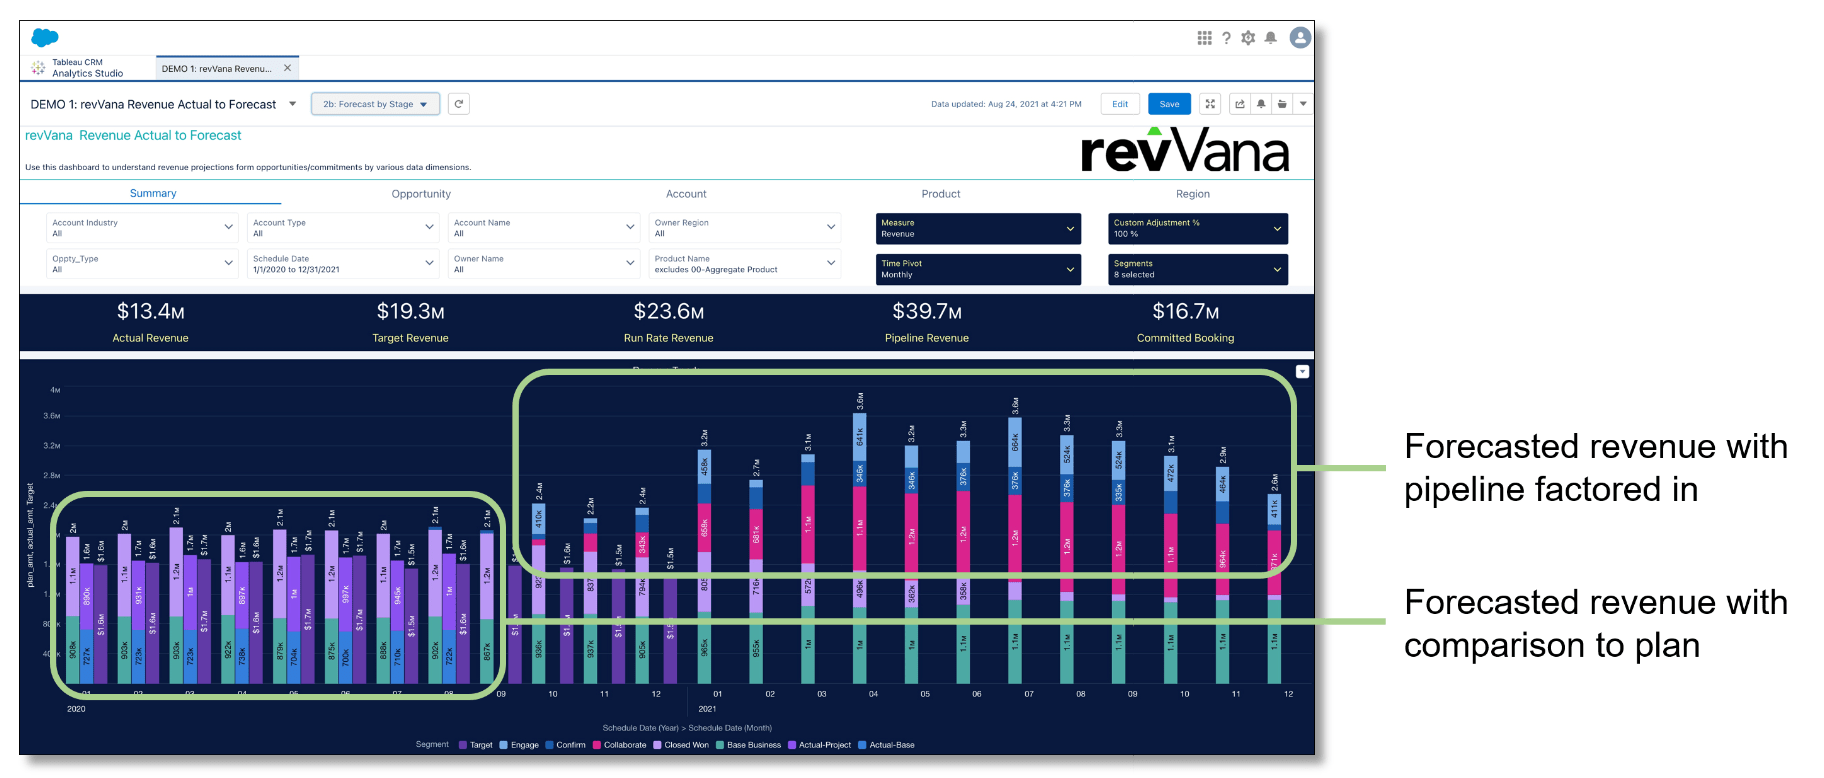 Forecast revenue directly from pipeline